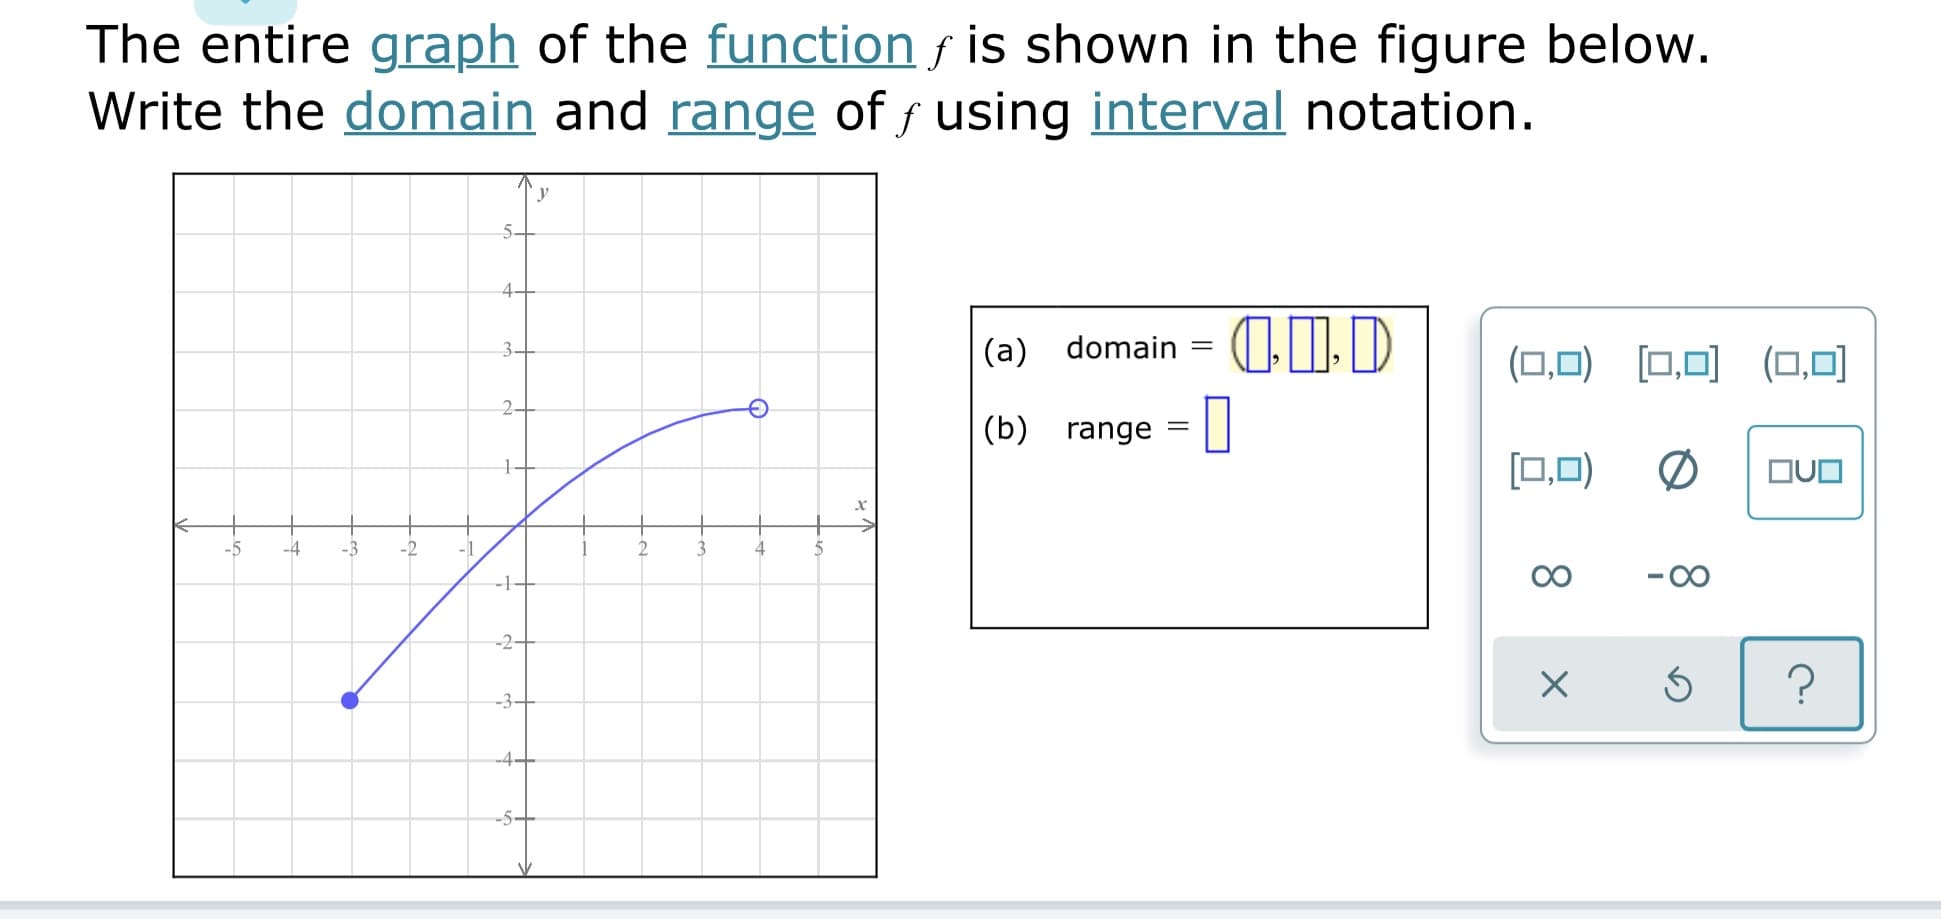 The entire graph of the function s is shown in the figure below.
Write the domain and range of f using interval notation.
CID
(a) domain
(0,0) [0,0) (0,0)
3-
2-
(b) range
[0,0)
OUO
-5
-4
00
-1-
-2-
-3-
--5–
